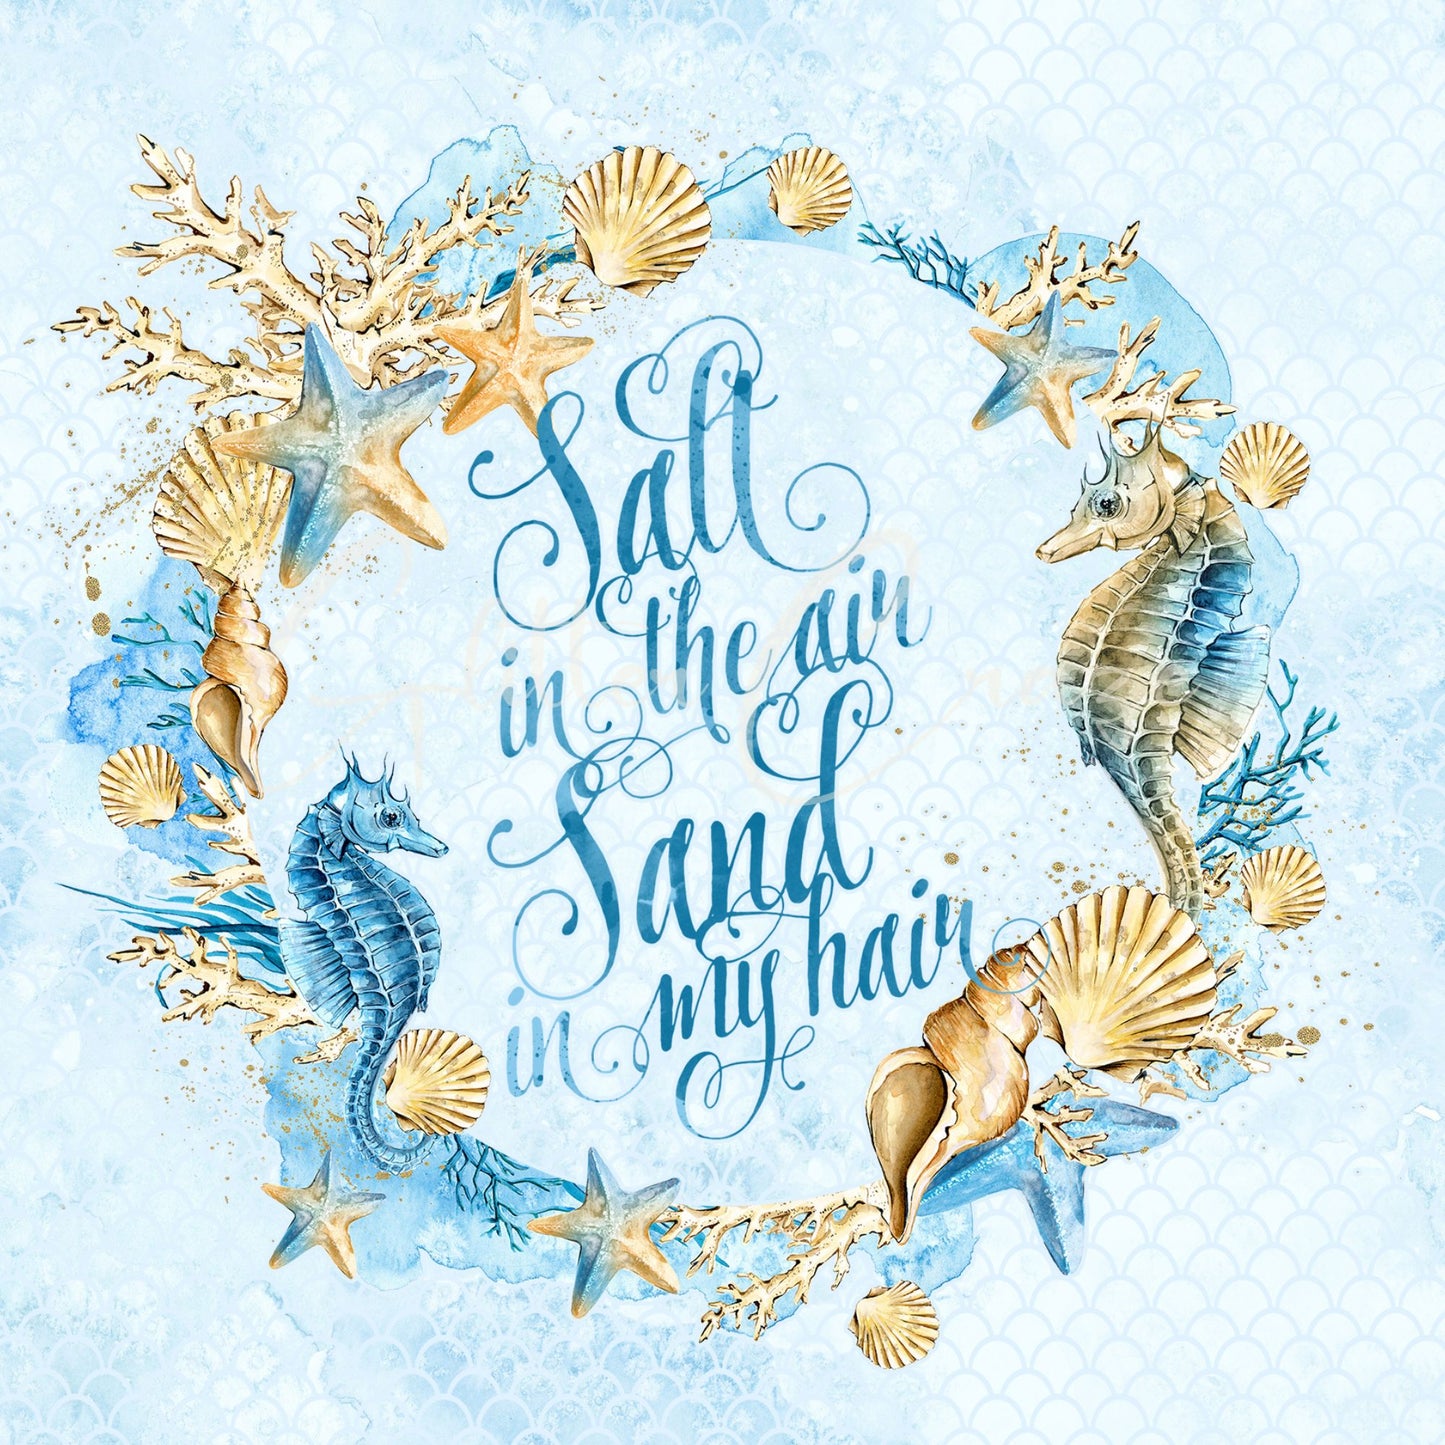 Salt and Sea Collection, 12x12 inch prints, 14 Design Options